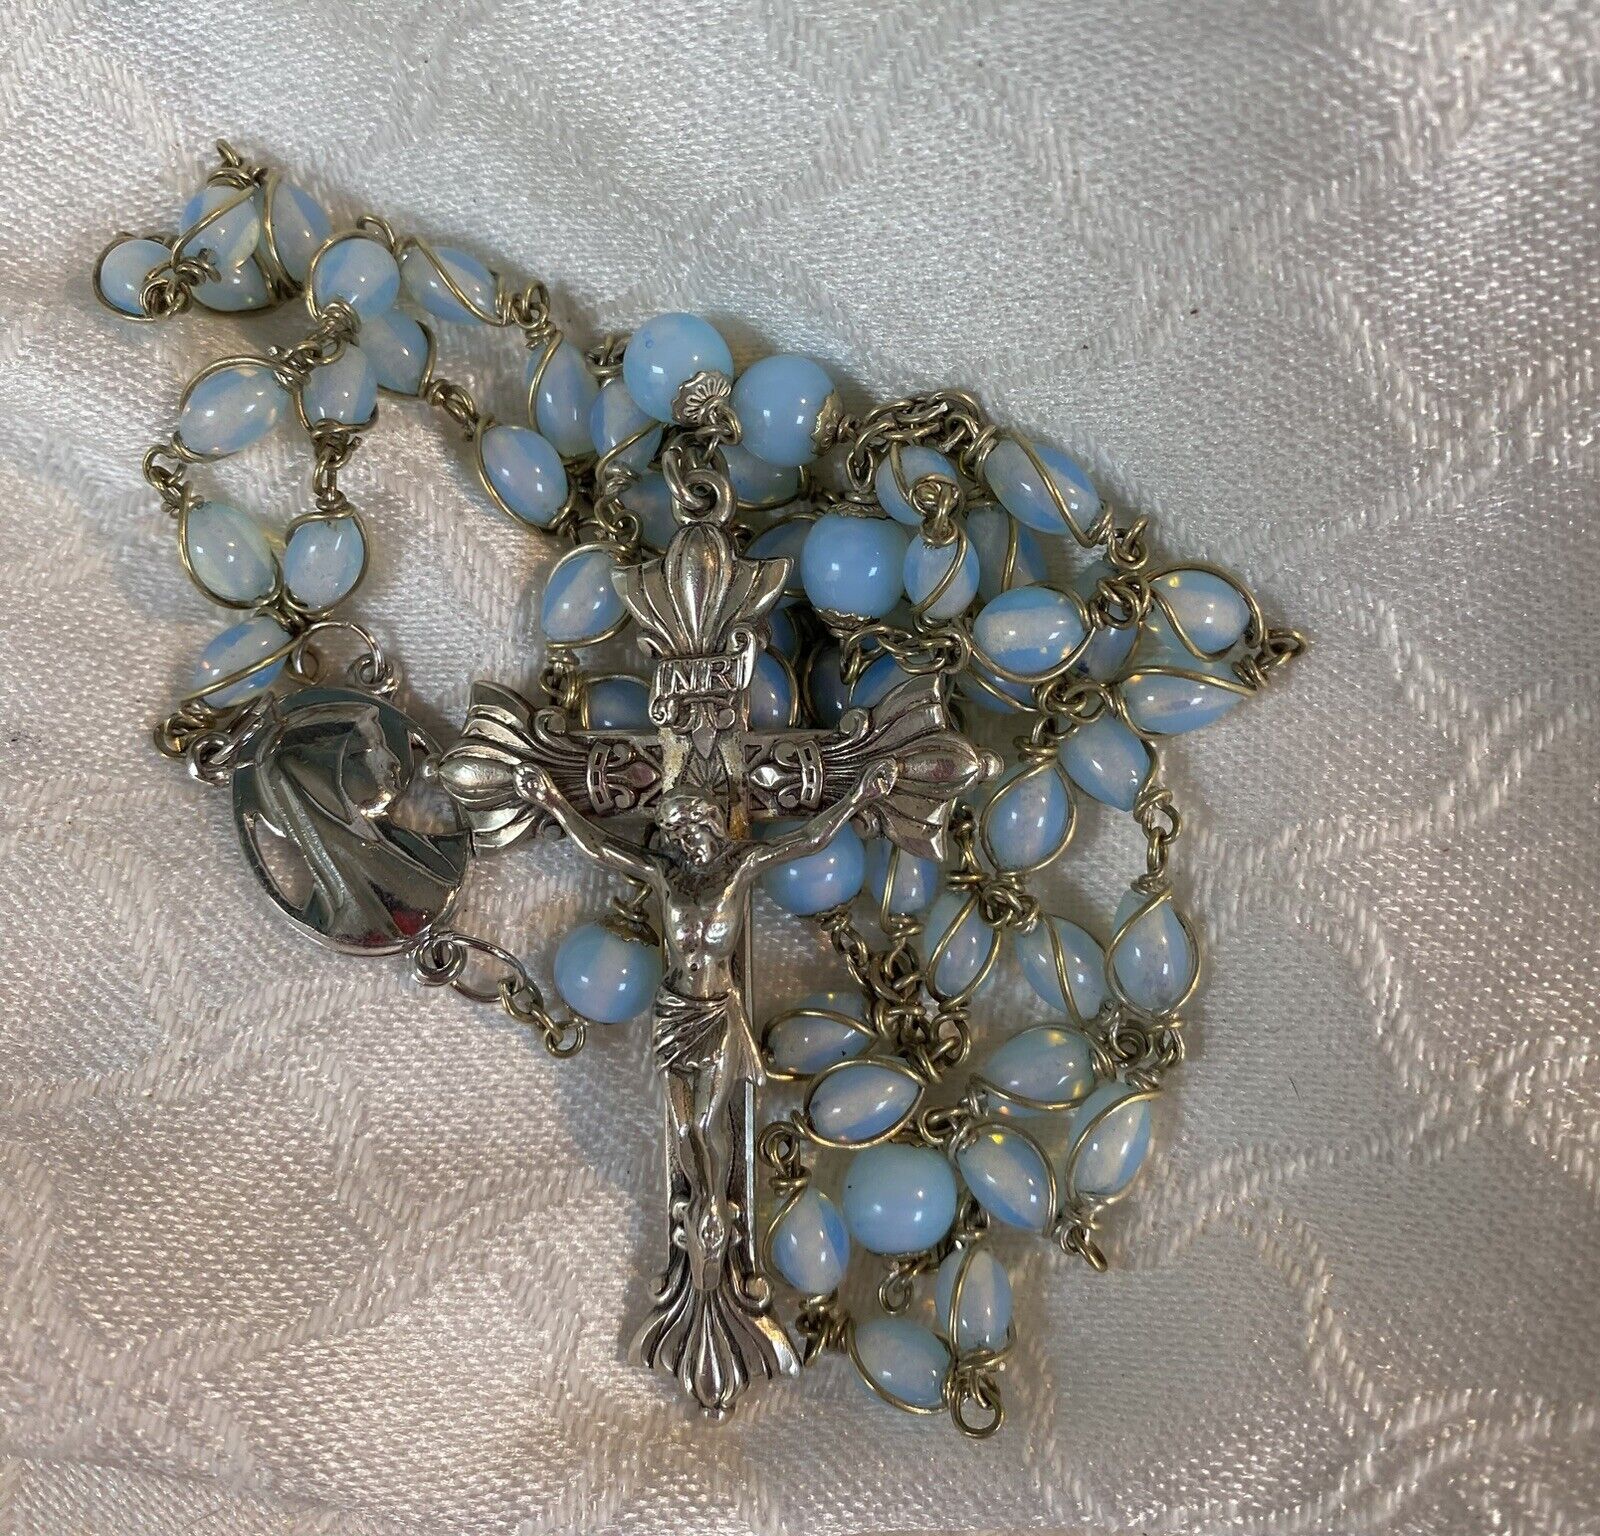 RARE CREED STERLING Orphaned Crucifix, Center Medal From Moonstone Rosary